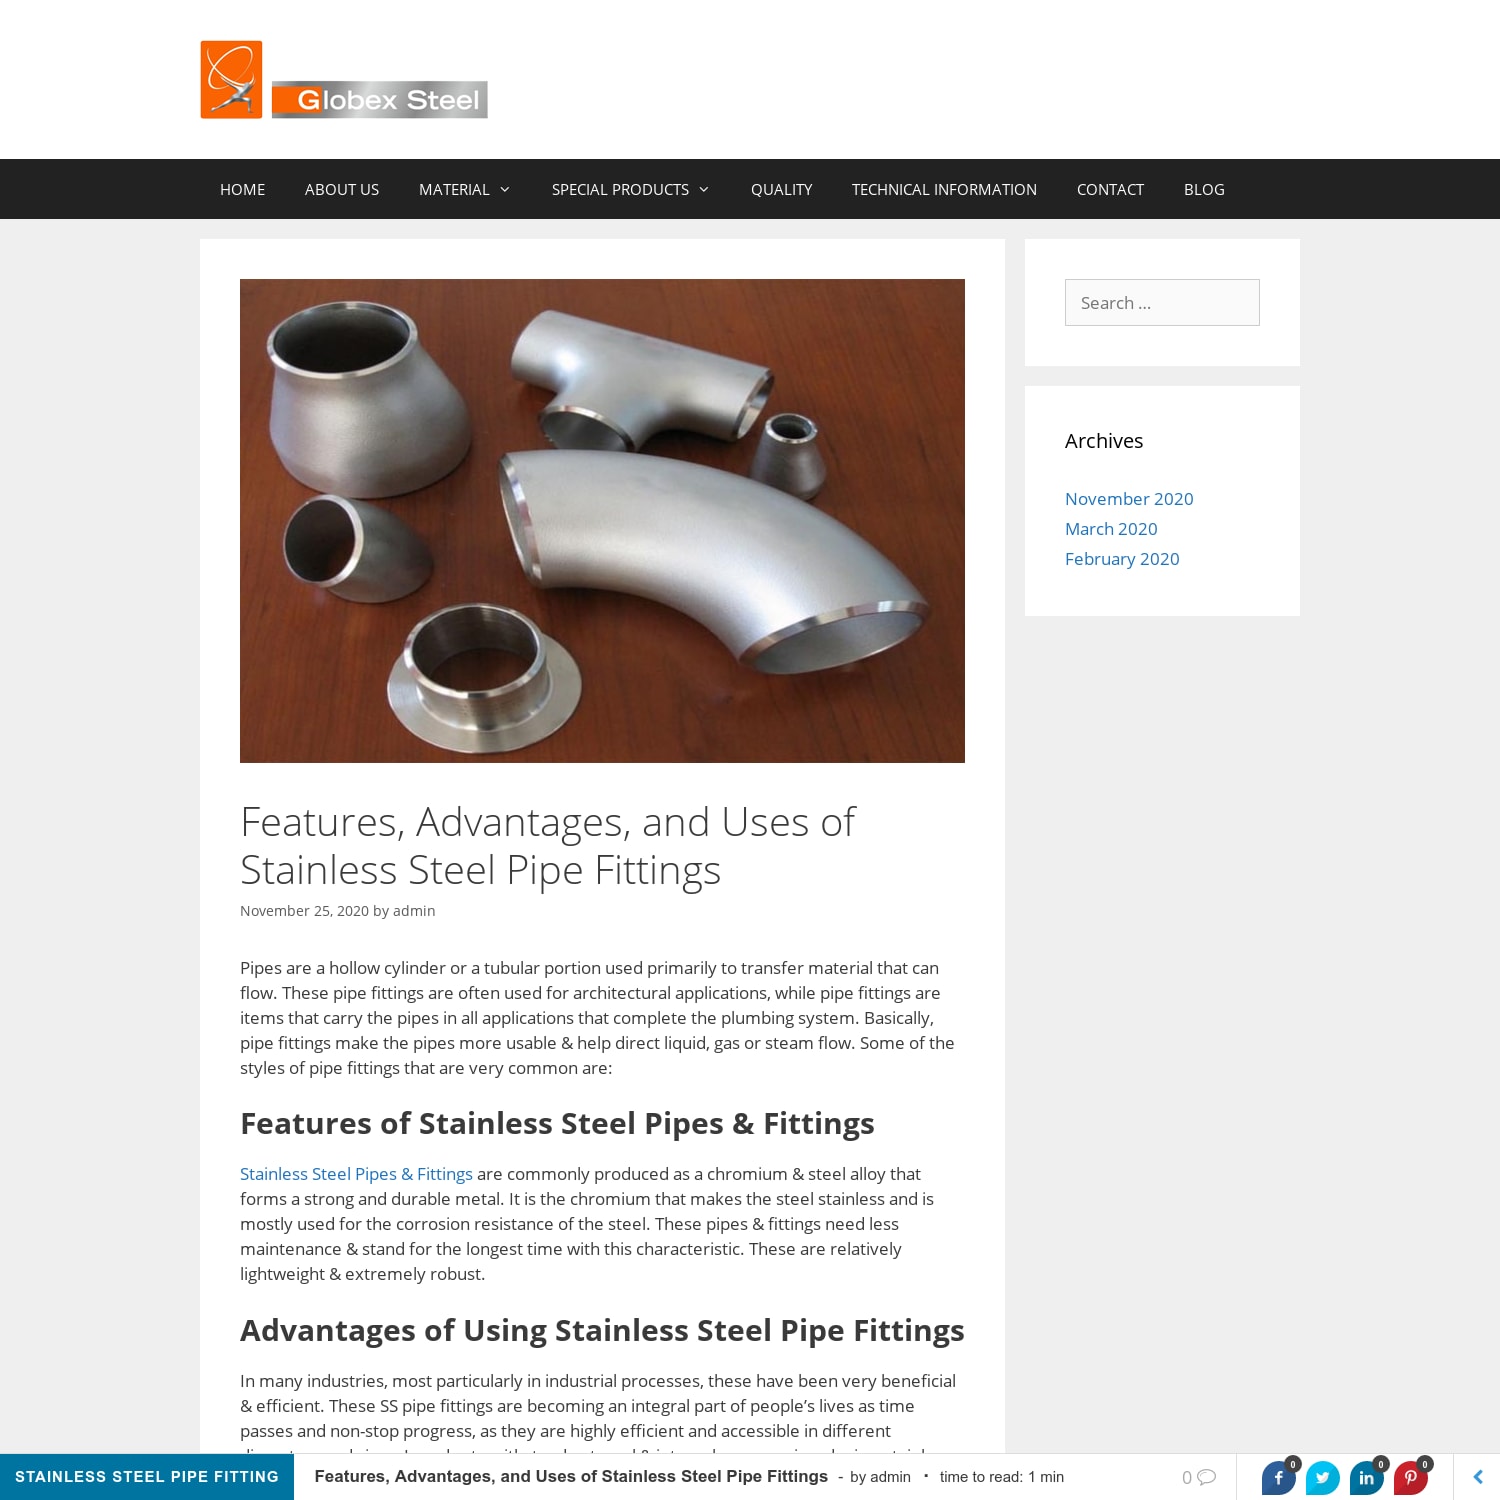 Features, Advantages, and Uses of Stainless Steel Pipe Fittings